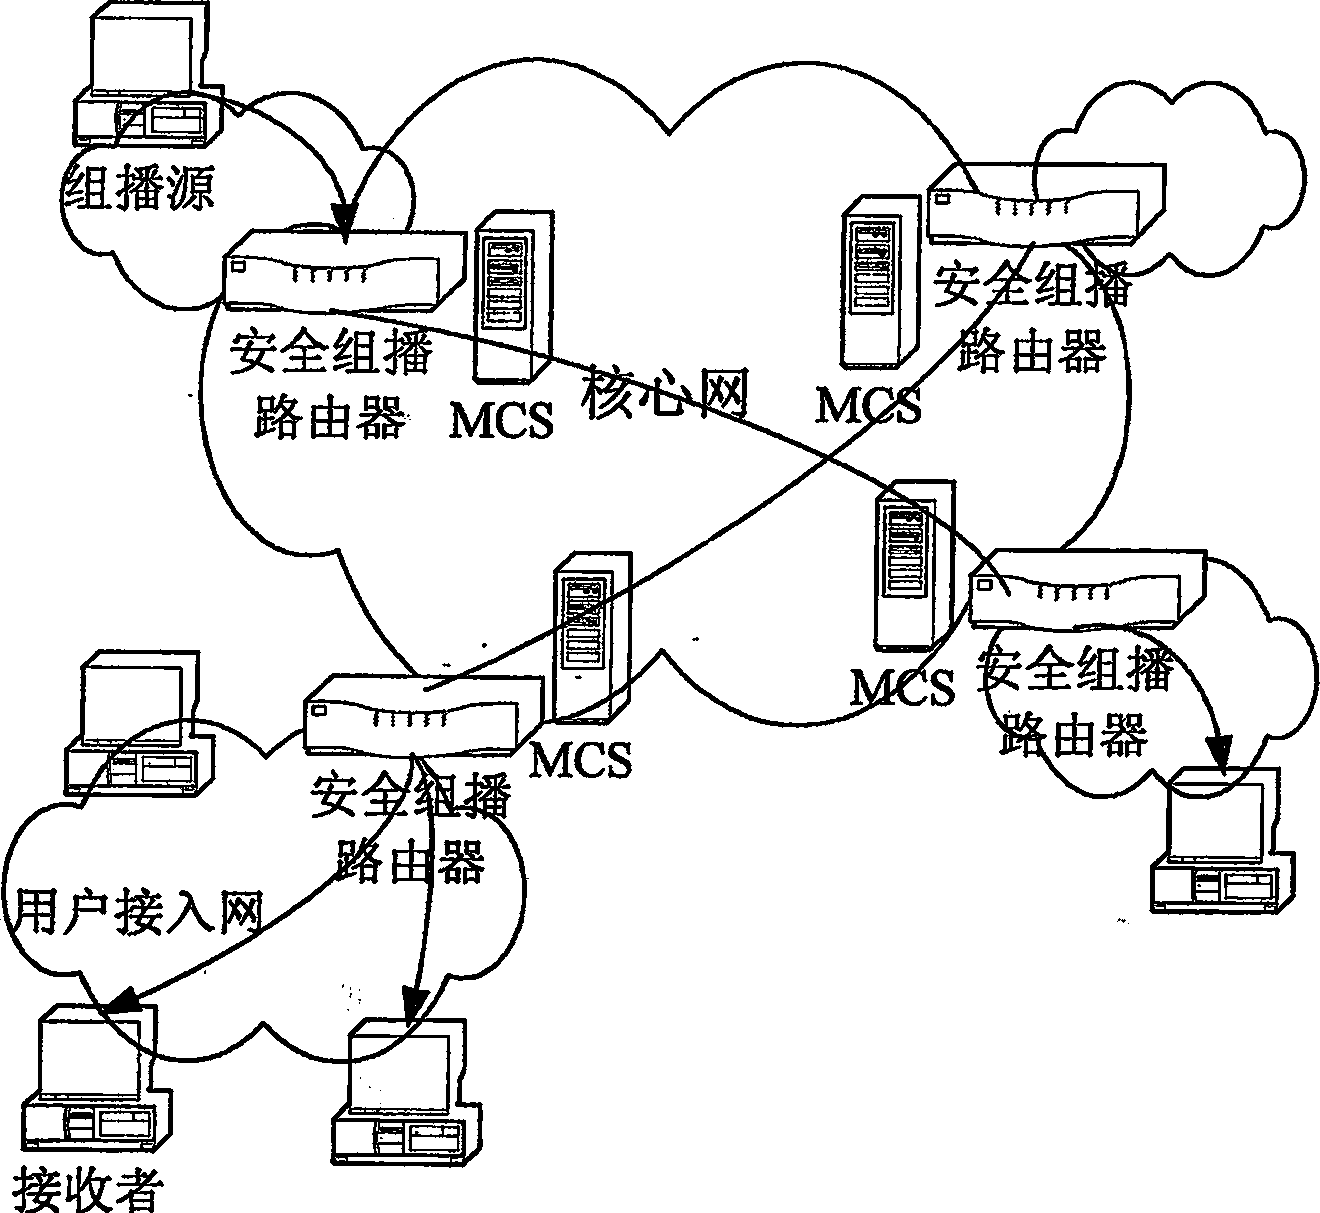 Safety multicast method based on protocol of conversation initialization